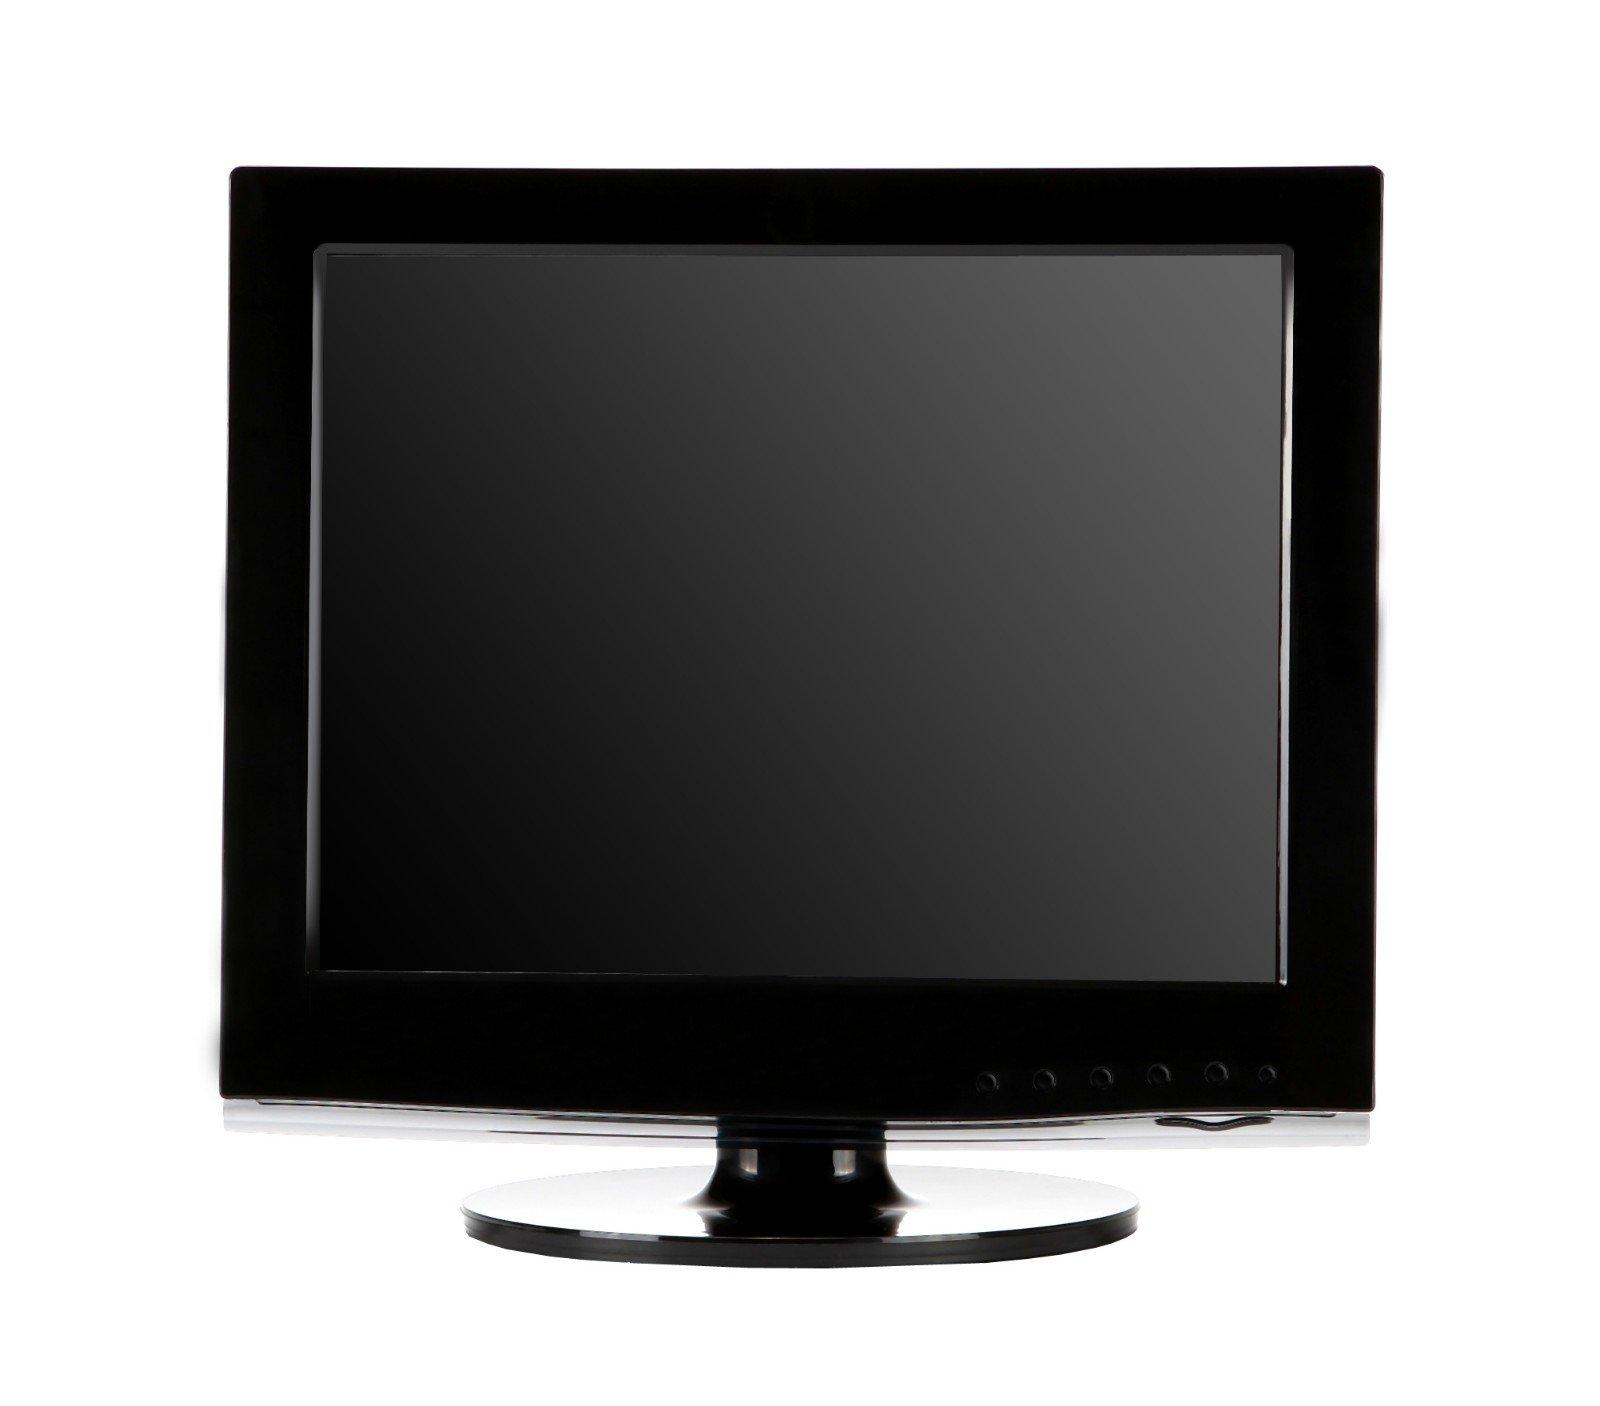 Xinyao LCD 15 inch tft lcd monitor with hdmi output for tv screen